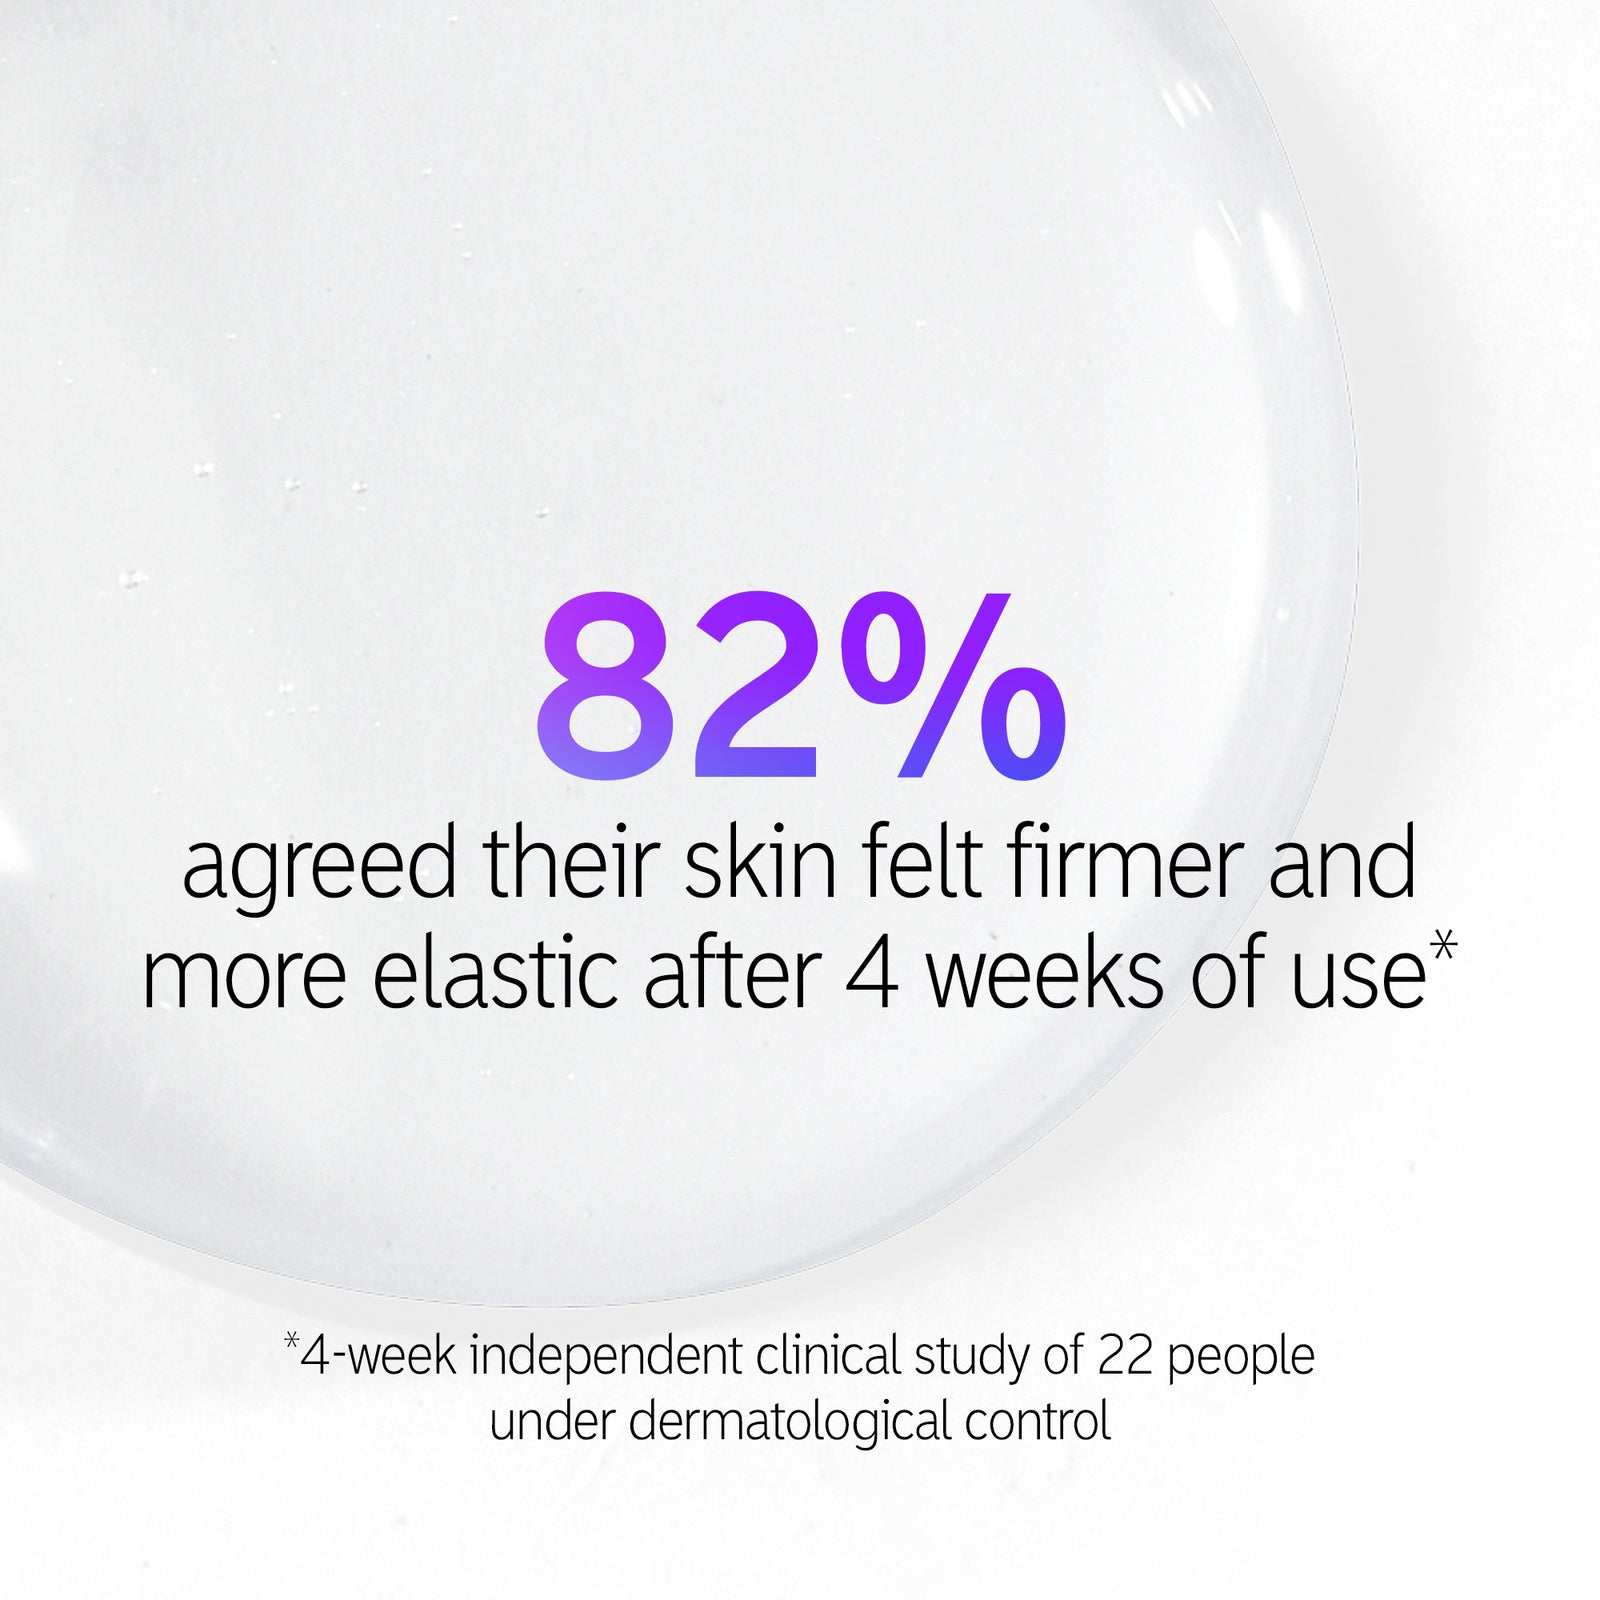 Goop shot with text overlay '82% agreed their skin felt firmer and more elastic after 4 weeks of use*'